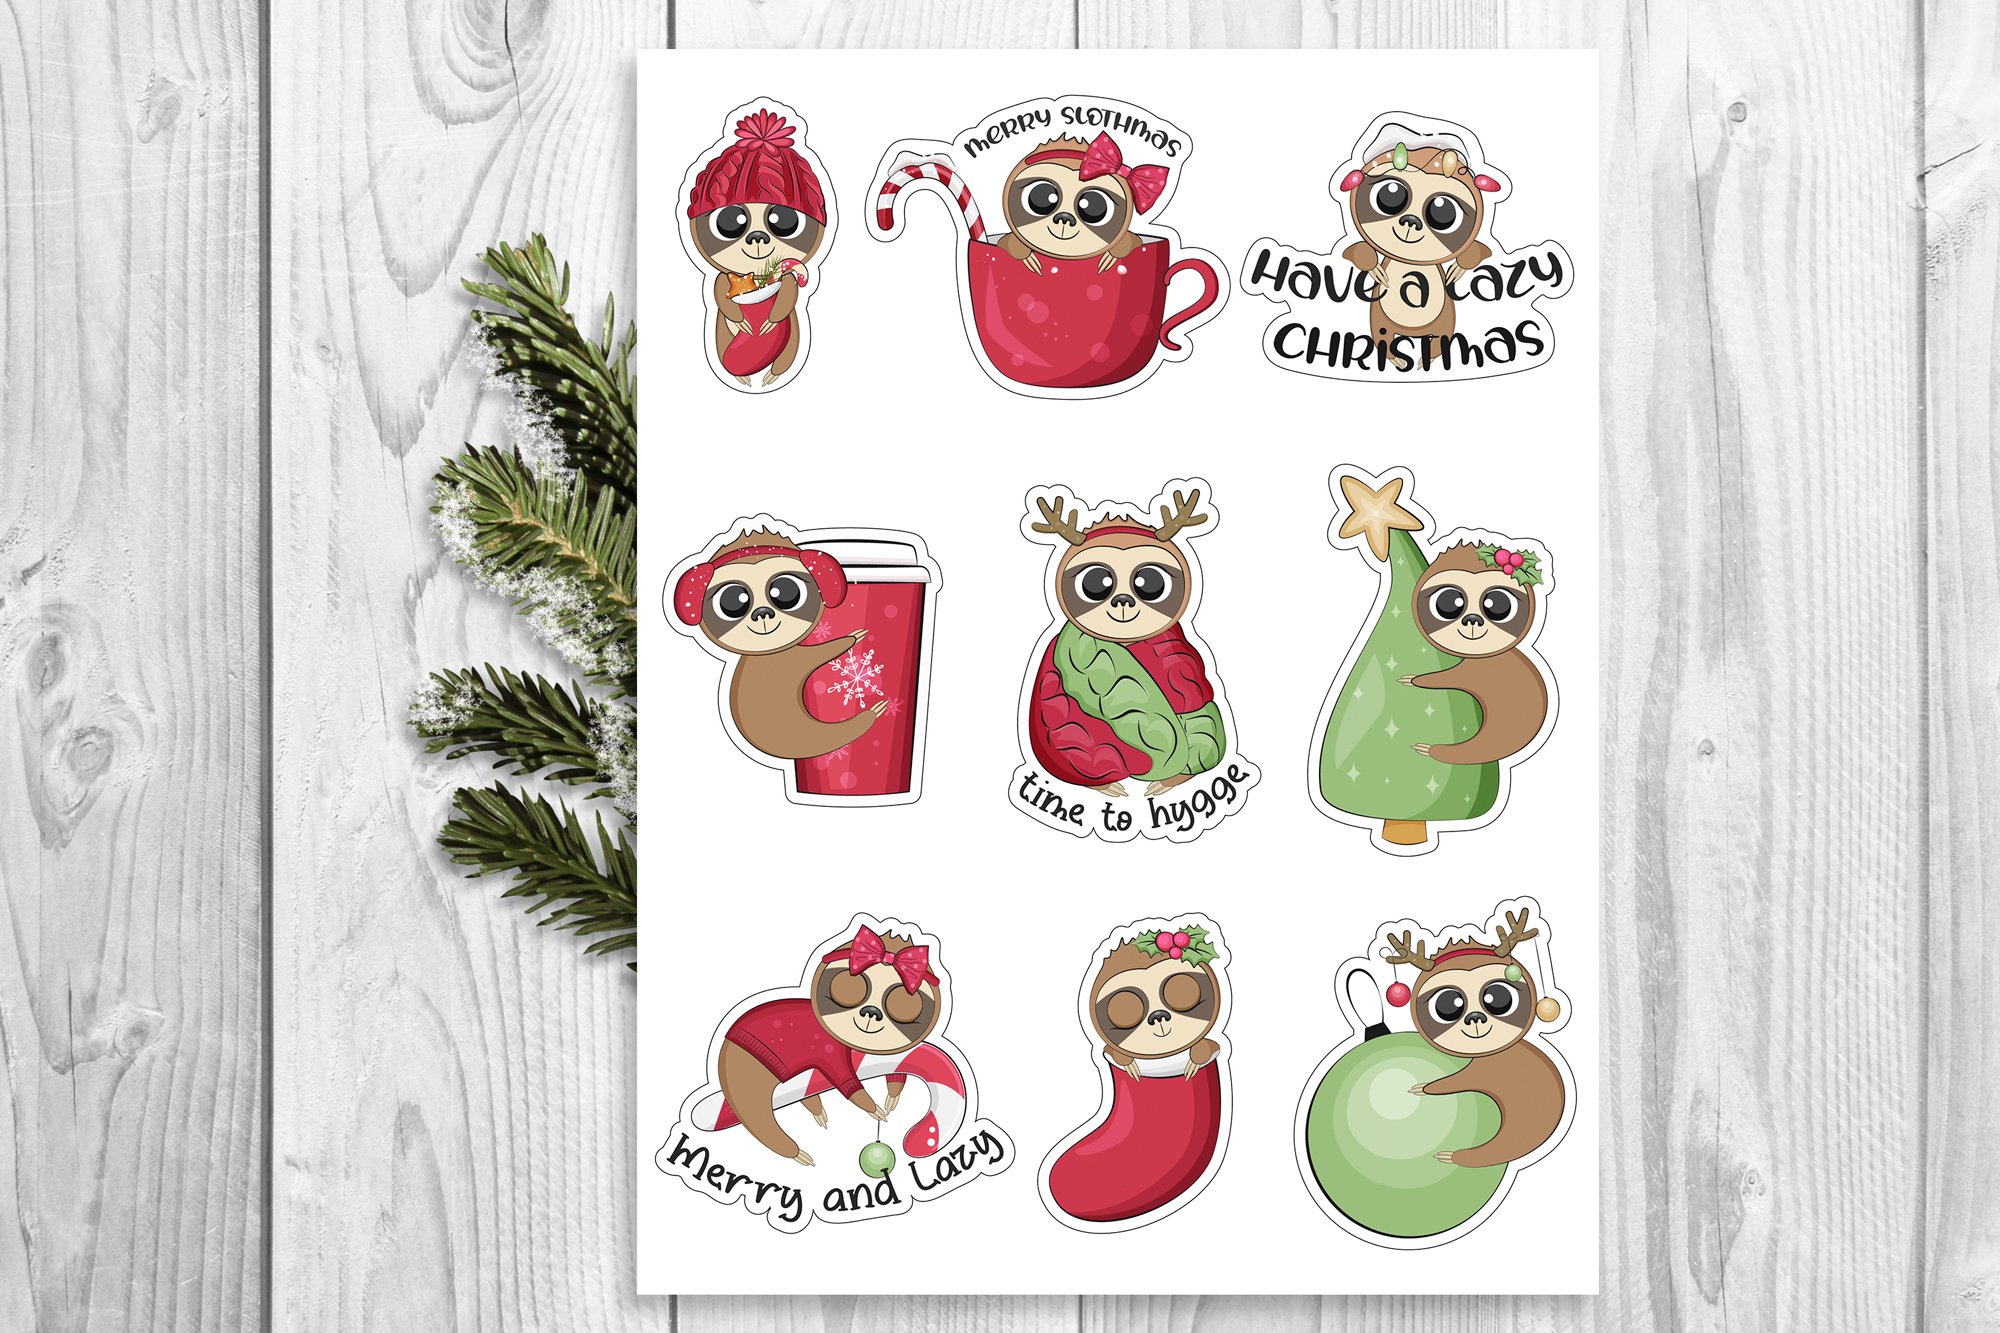 Awesome owl stickers and other Christmas stuff.